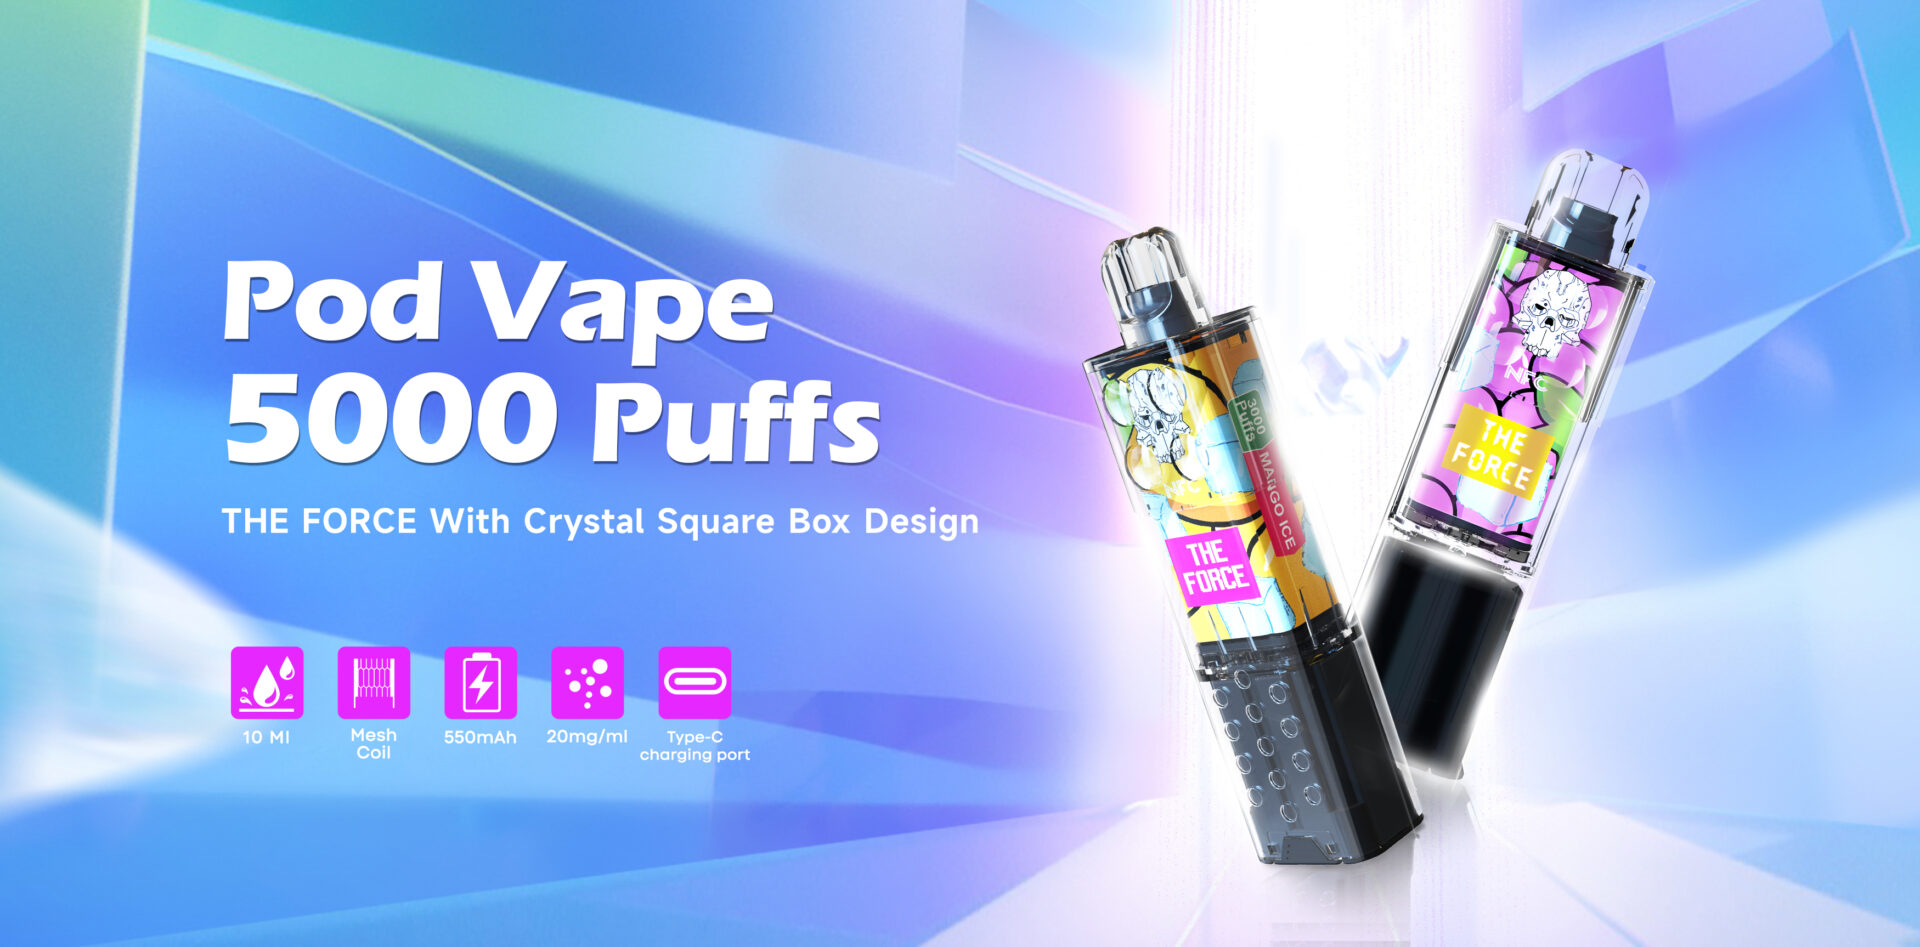 Ejuice Store offers a wide range of premium disposable vape that are fully customizable with the most popular top-tier flavors at the lowest possible prices.